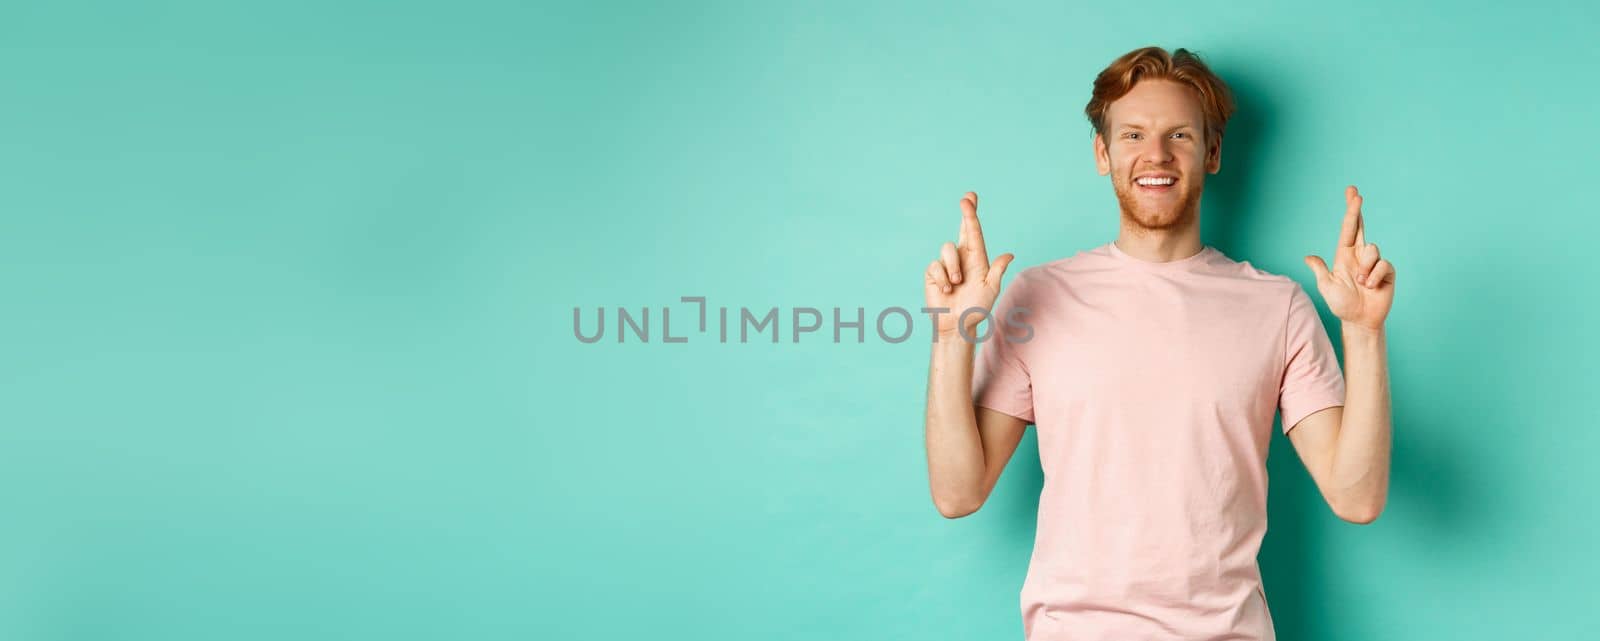 Optimistic guy with red hair and beard smiling, cross fingers for good luck and looking hopeful at camera, making a wish, standing over mint background.